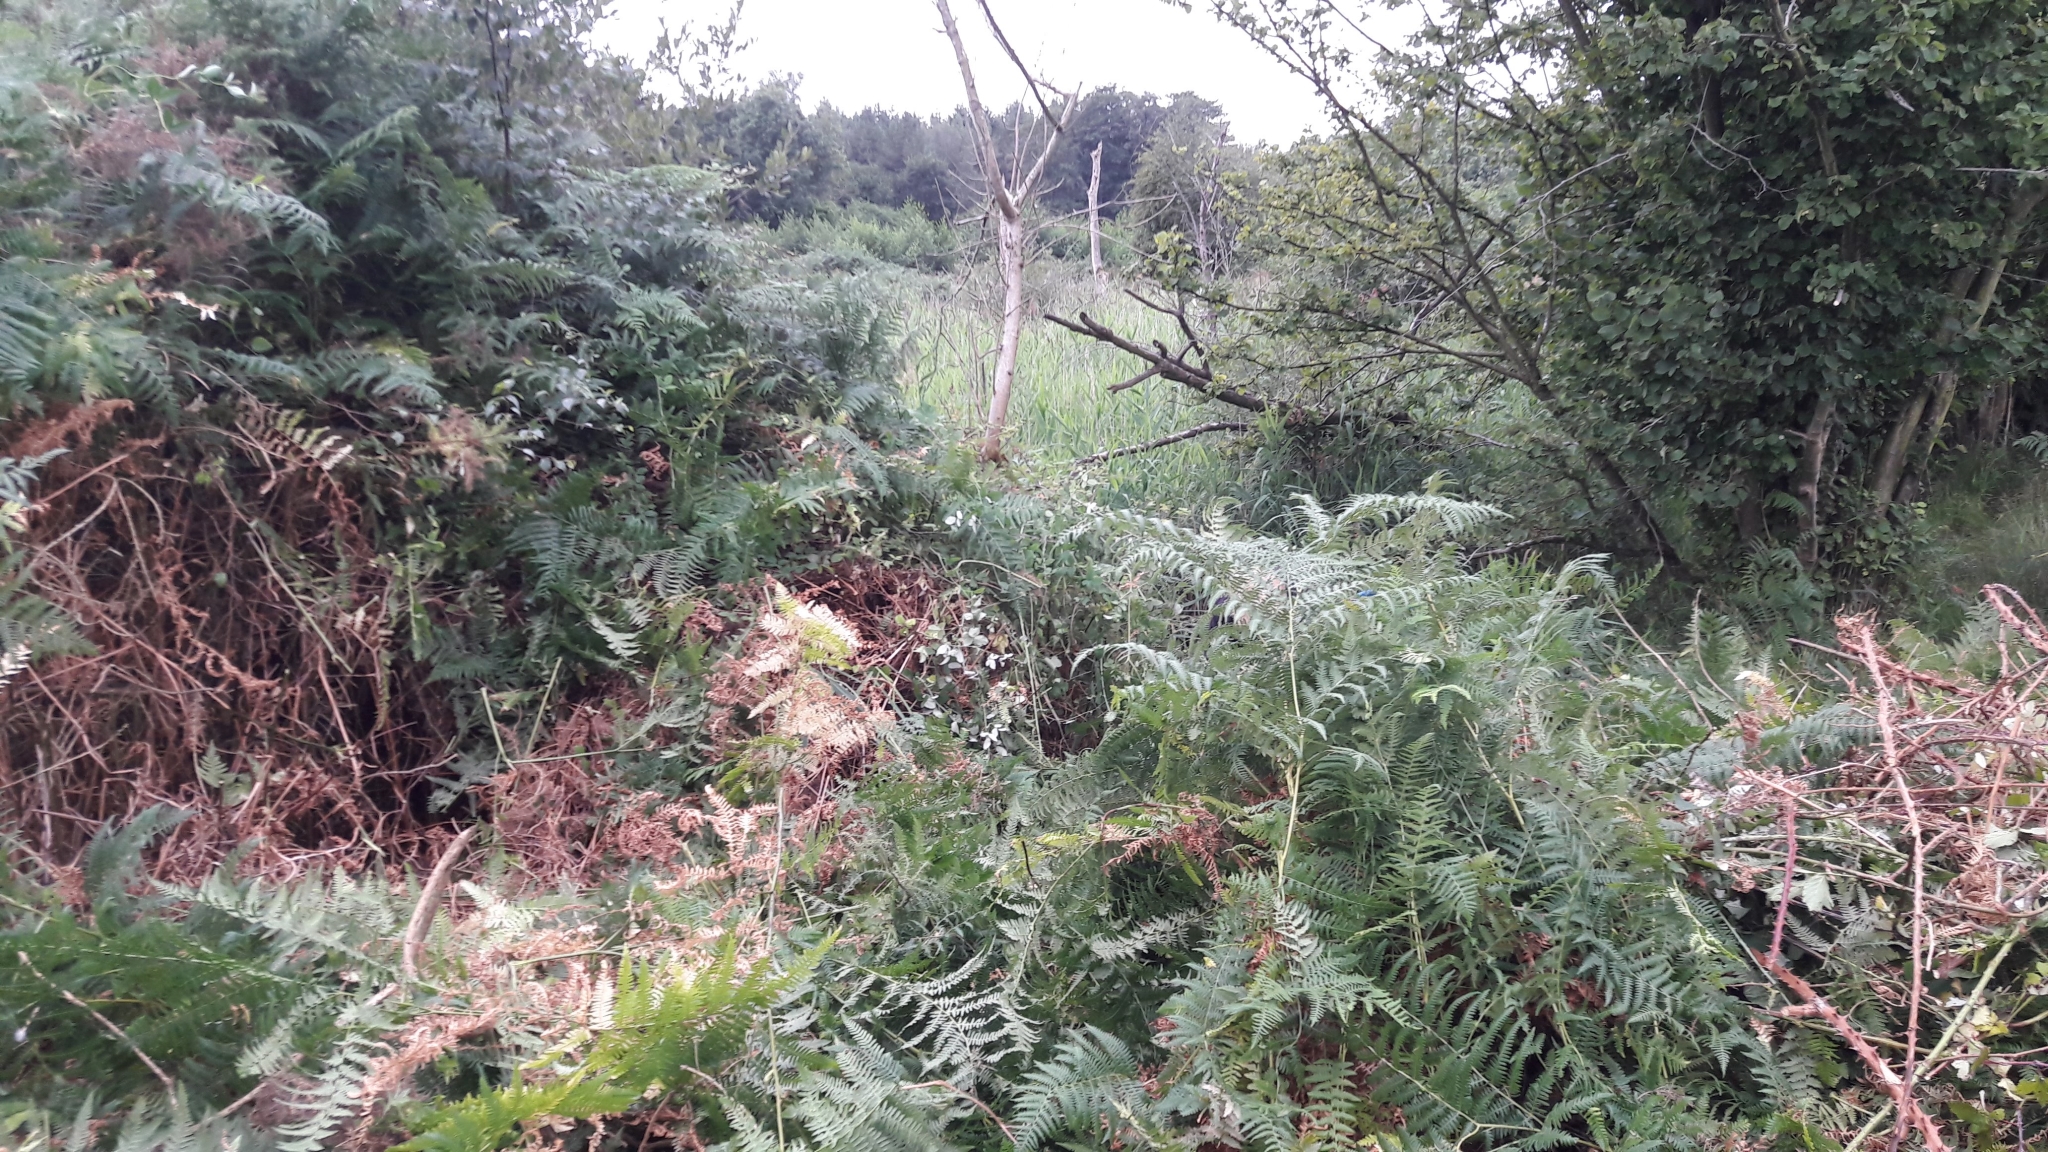 A photo from the FoTF Conservation Event - August 2018 - Gorse Removal at Hockham Hills & Holes : A shot of the work site